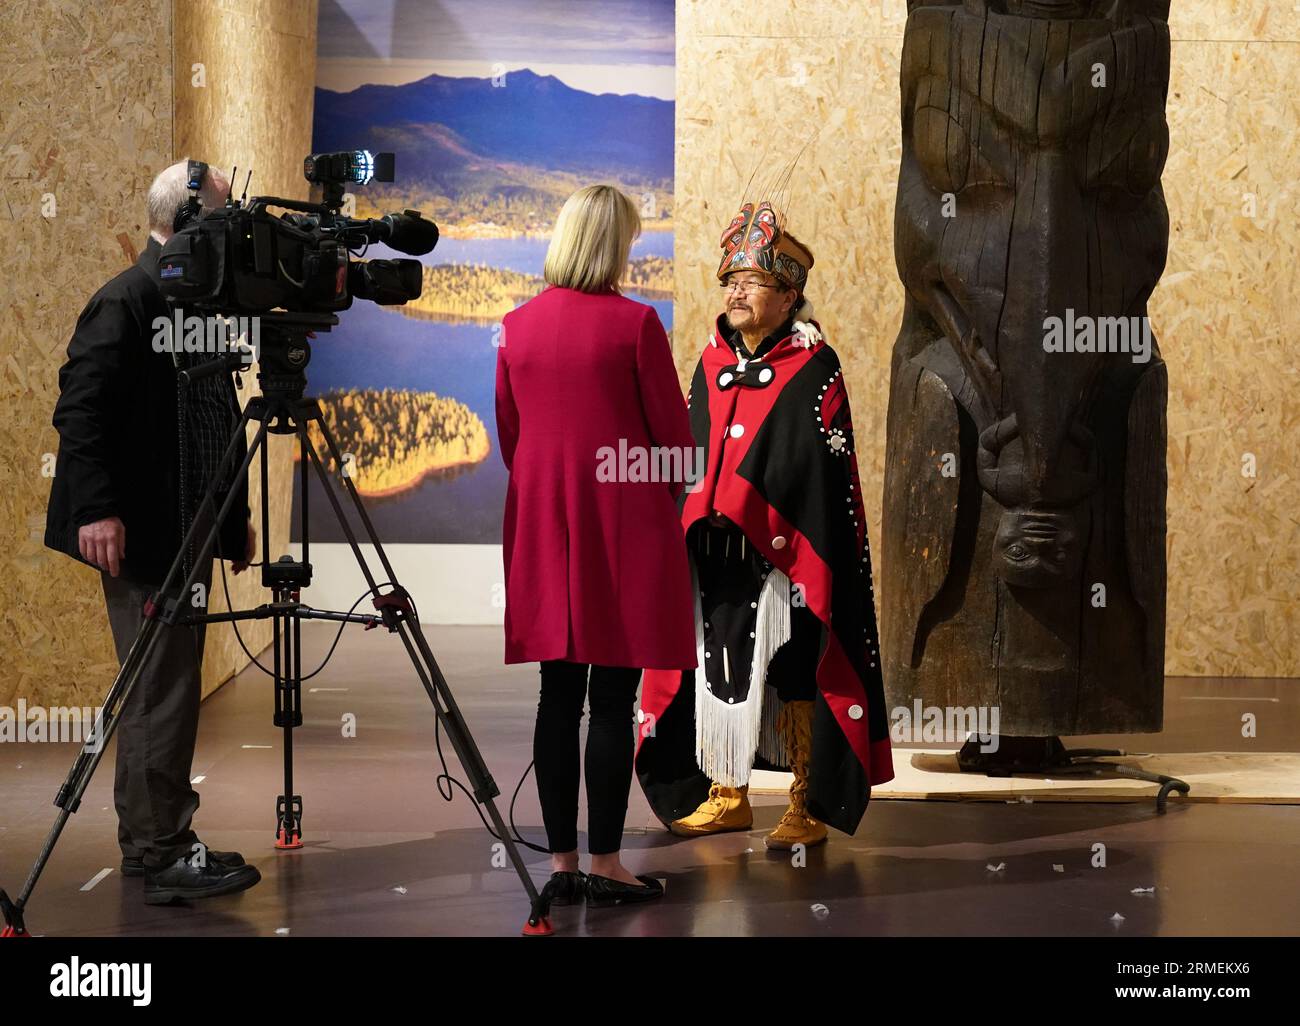 Earl Stephen's(who has the Nisga'a cultural name Chief Ni'is Joohl) part of the delegation from the Nisga'a nation is interviewed by the media during a visit to the National Museum of Scotland in Edinburgh, ahead of the return of 11-metre tall memorial pole to what is now British Columbia. The Nisga'a Lisims Government (NLG) and National Museums Scotland (NMS) announced last month that the House of Ni'isjoohl memorial pole will return home to the Nass Valley this September. Picture date: Monday August 28, 2023. Stock Photo